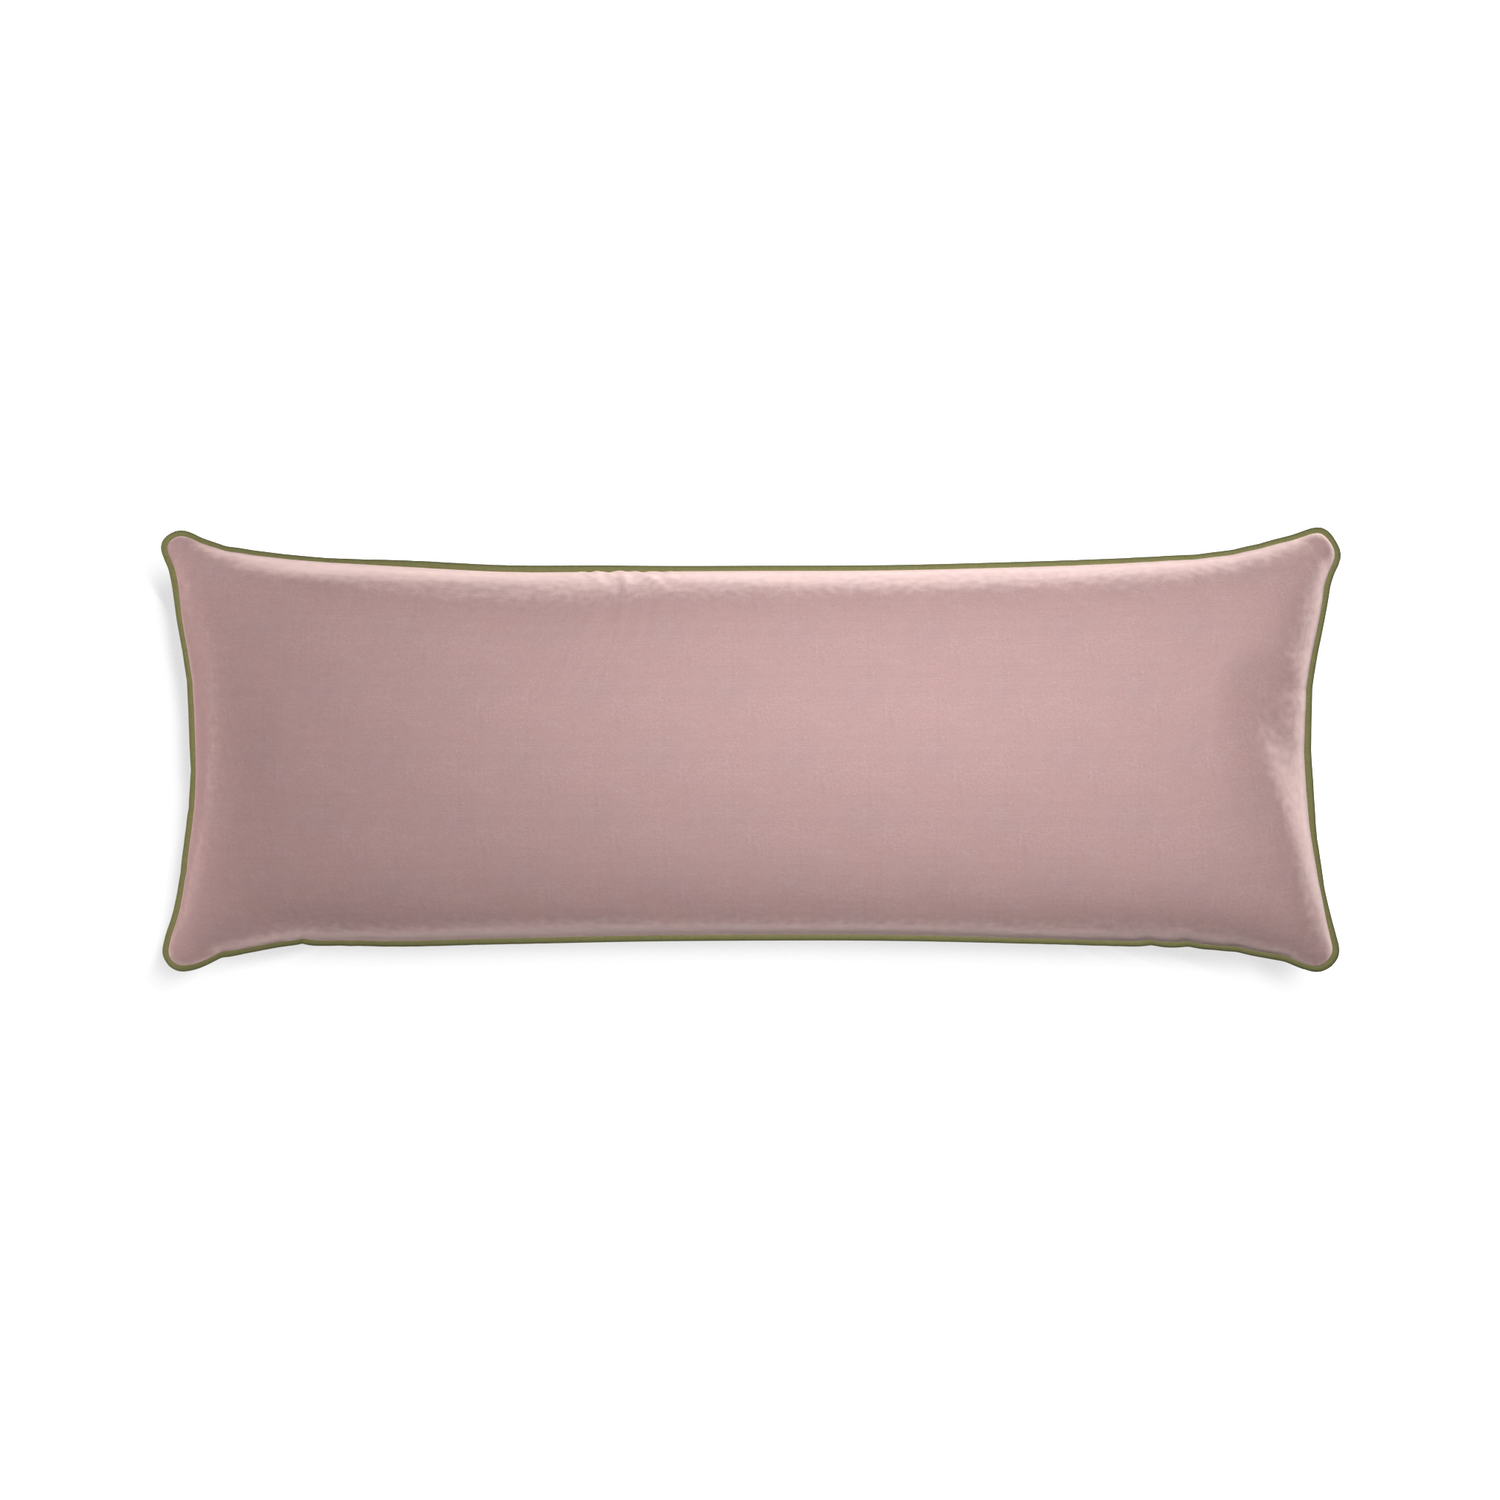 Xl-lumbar mauve velvet custom pillow with moss piping on white background